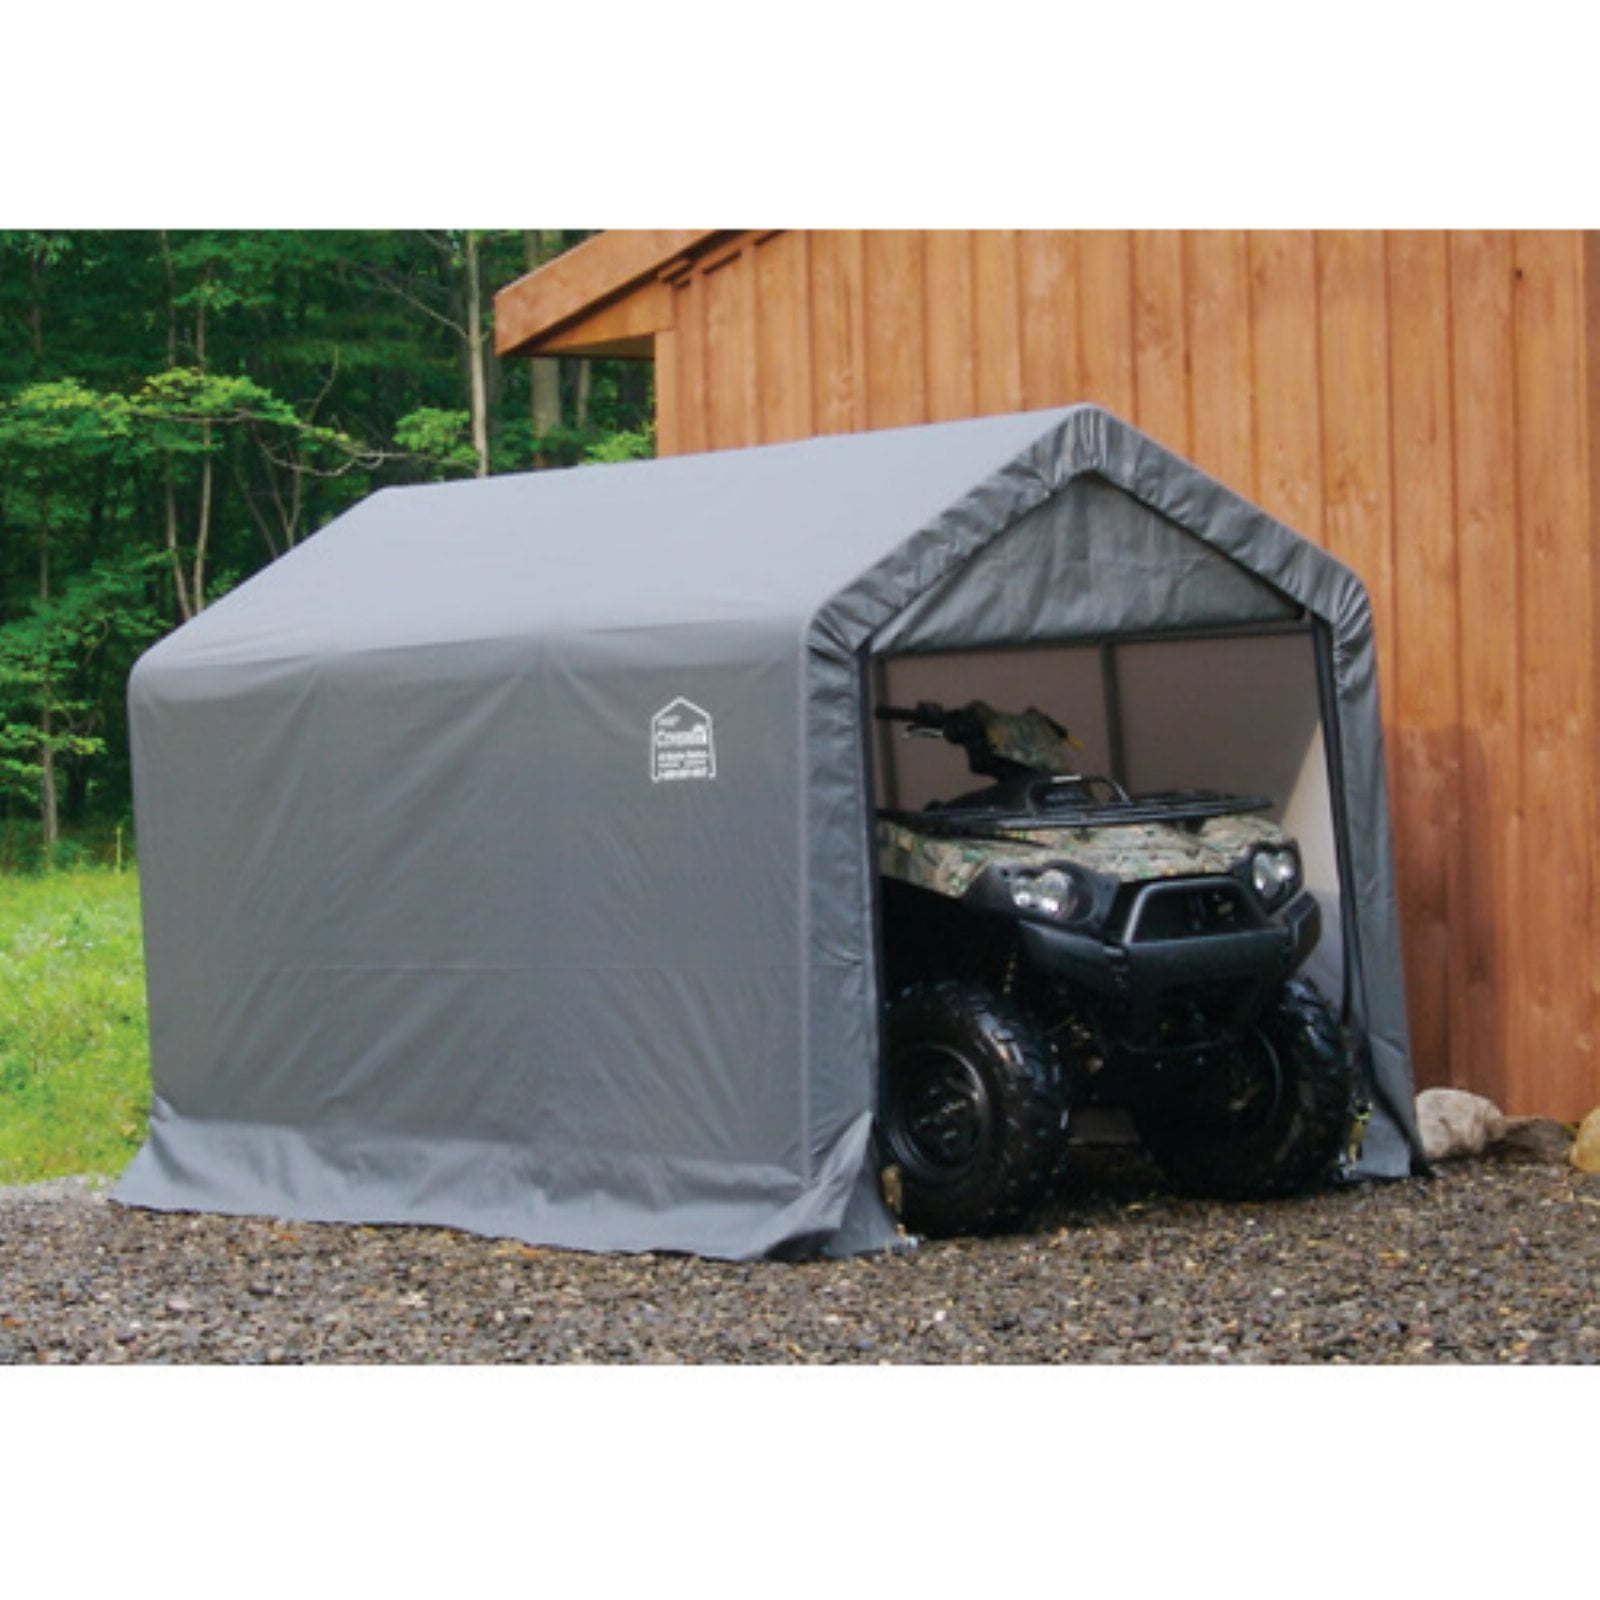 ShelterLogic Shed-In-A-Box Canopy Storage Shed 6W x 10D x 6.5H ft. 